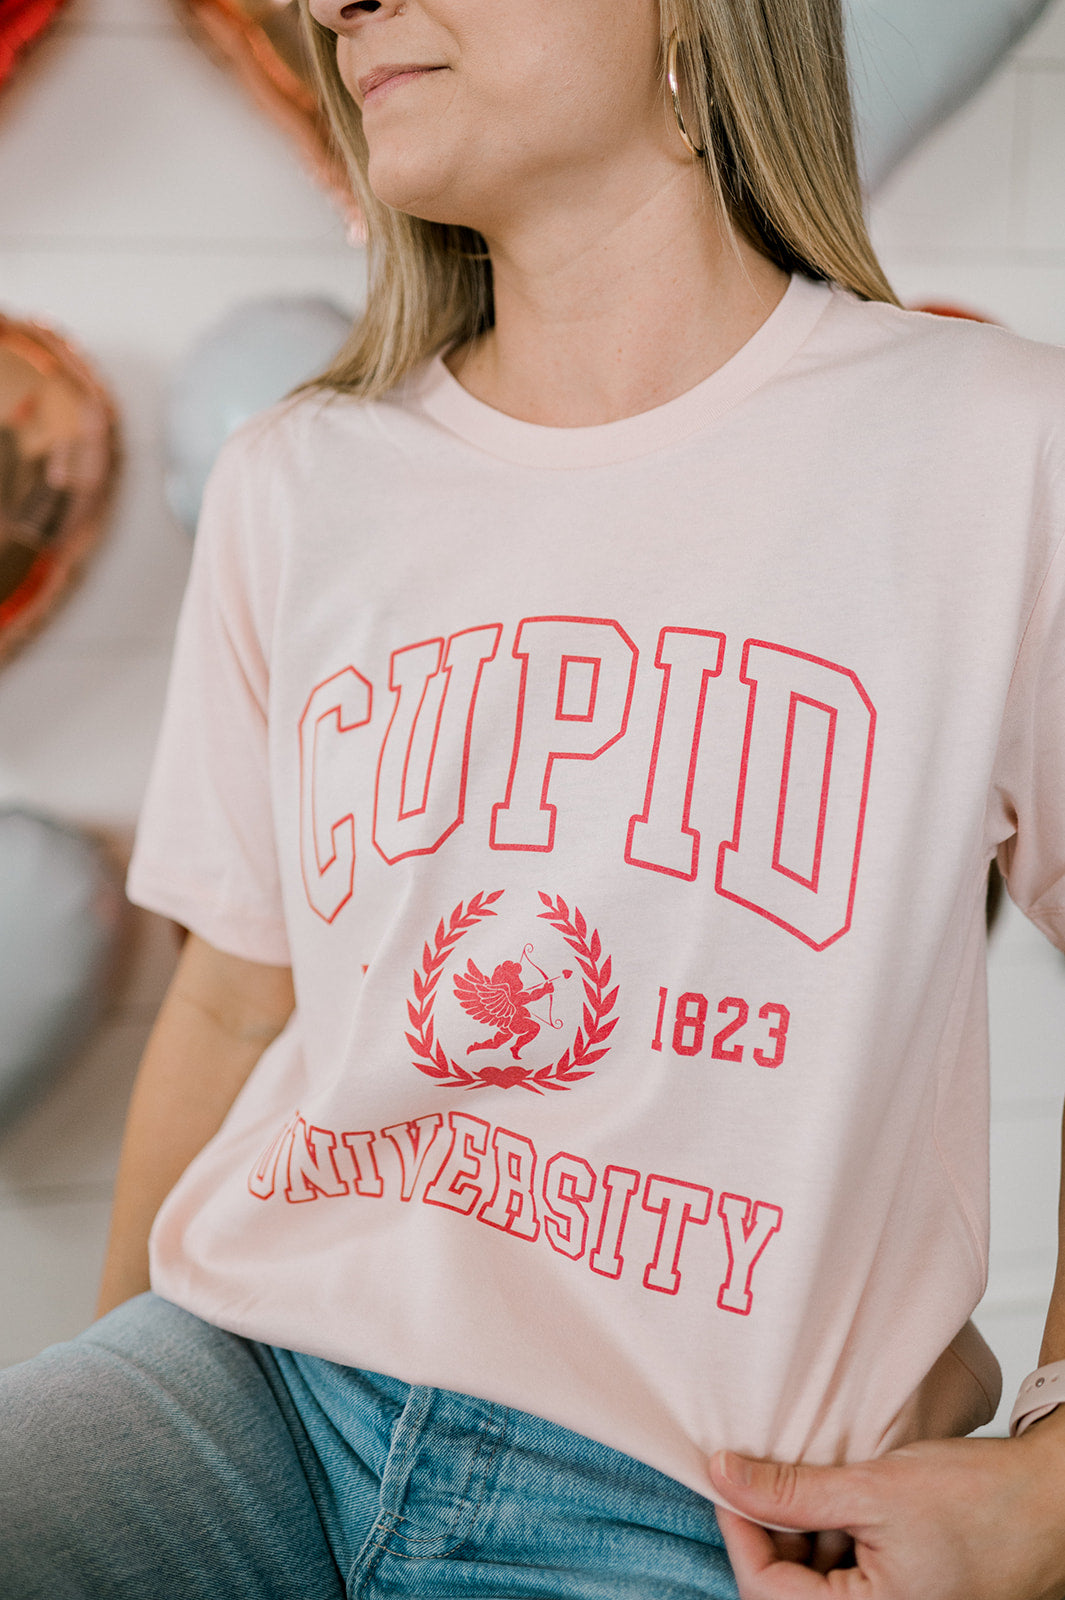 Cupid University | Tee | Adult-Sister Shirts-Sister Shirts, Cute & Custom Tees for Mama & Littles in Trussville, Alabama.